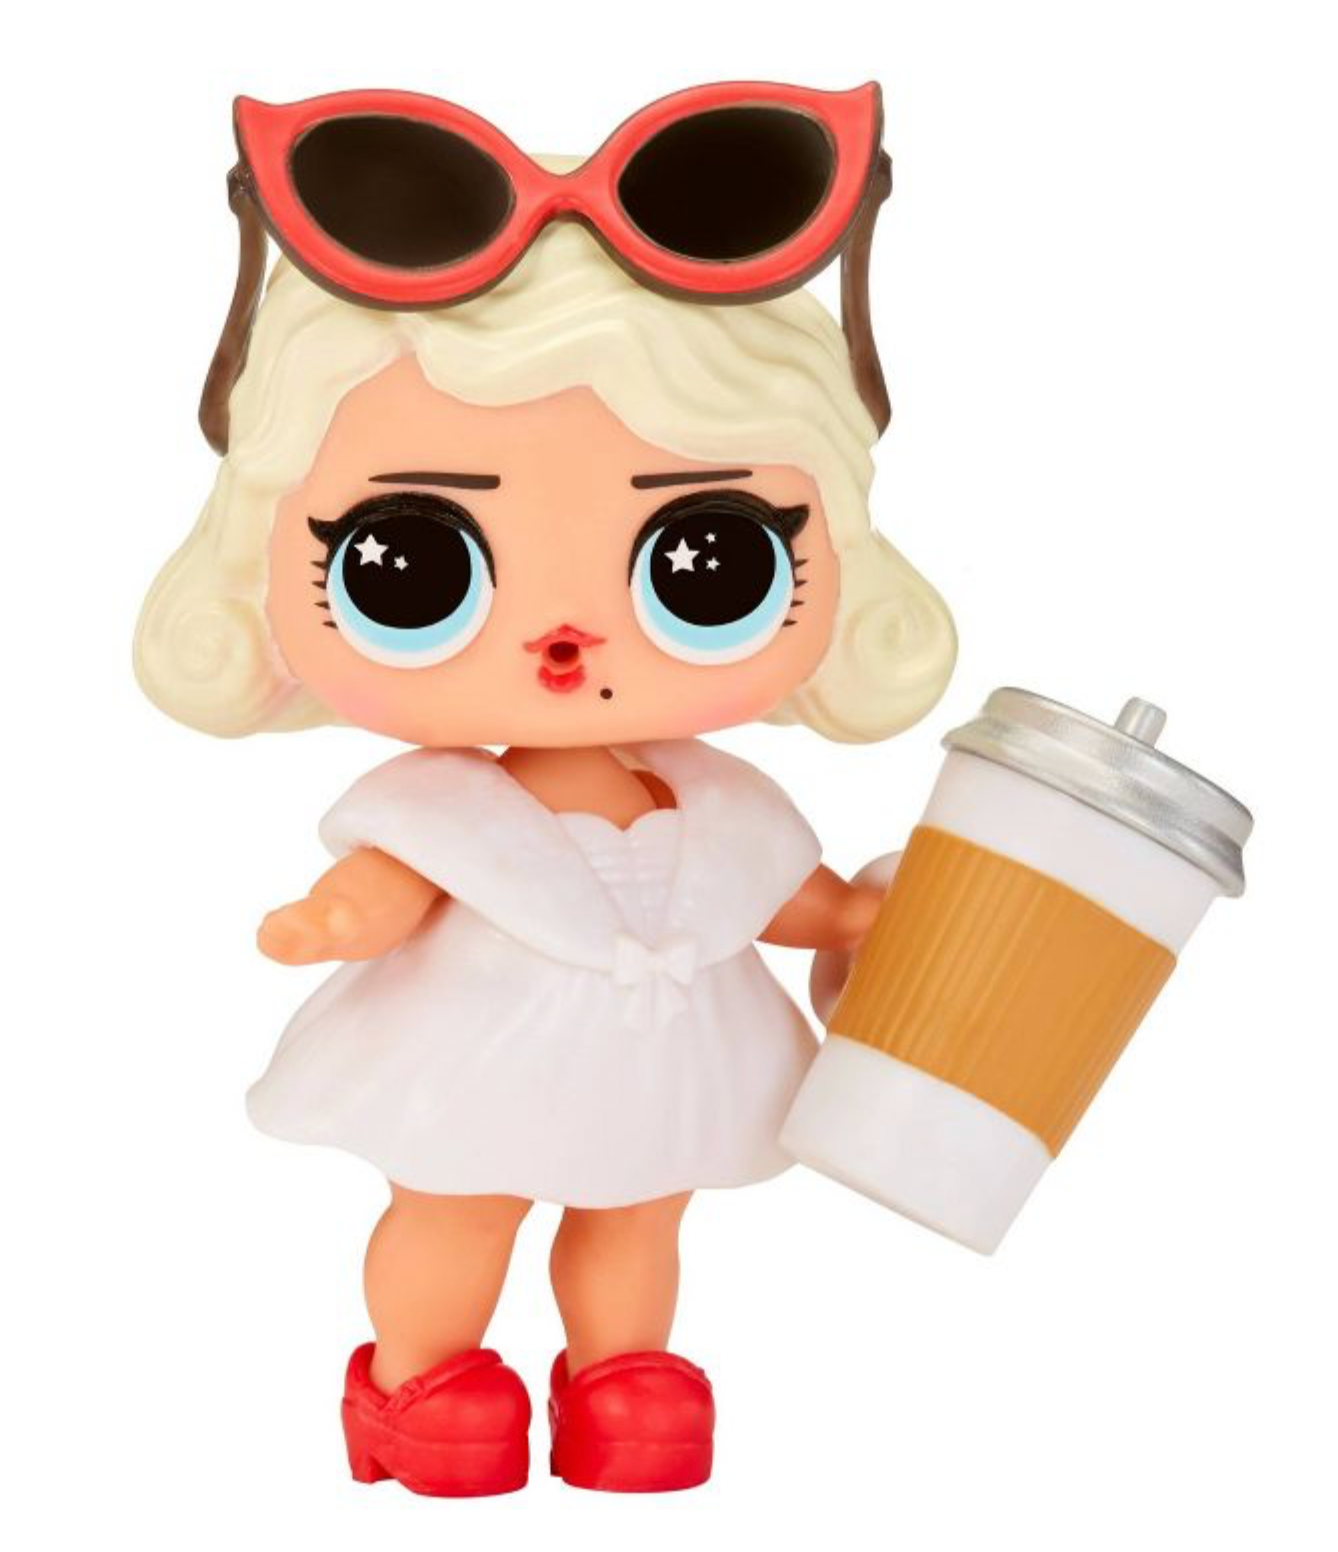 L.O.L. Surprise! Lil Music Tour Playset with Cheeky Babe Collectible Doll and 8 Surprises